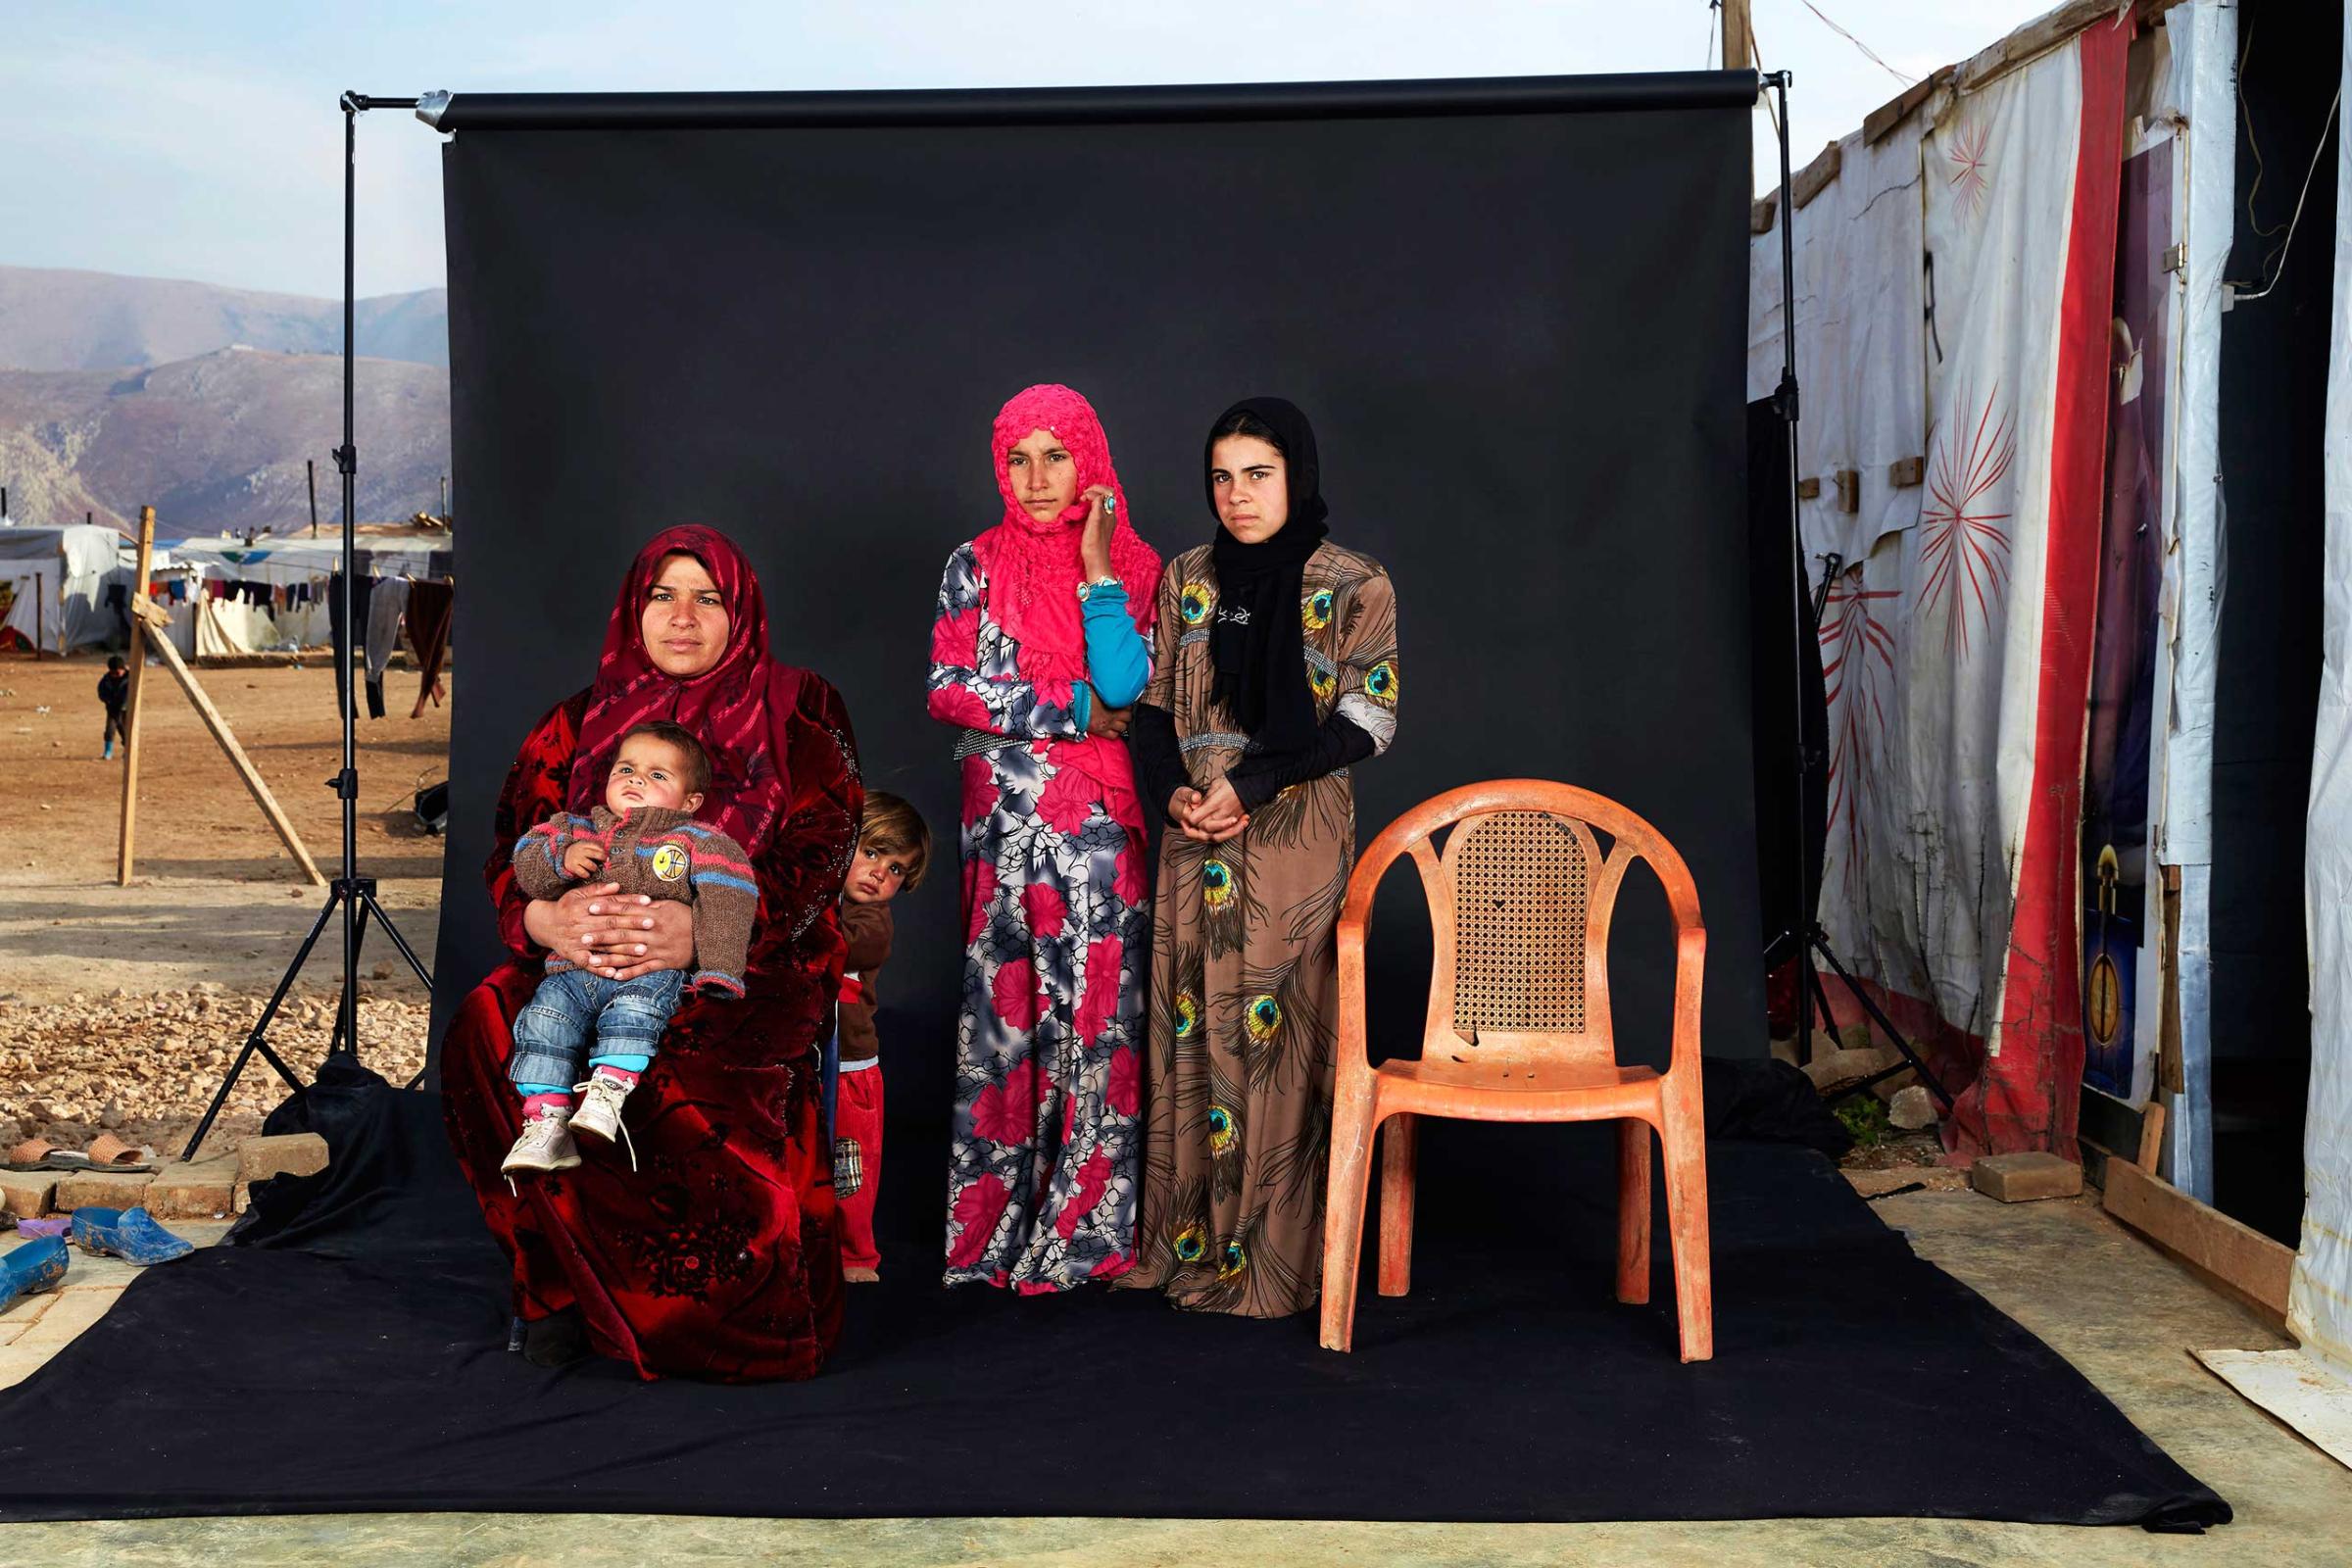 People, 3rd prize singles. Portrait of a Syrian refugee family in a camp in Bekaa Valley, Lebanon, on 15 December 2015. The empty chair in the photograph represents a family member who has either died in the war or whose whereabouts are unknown.